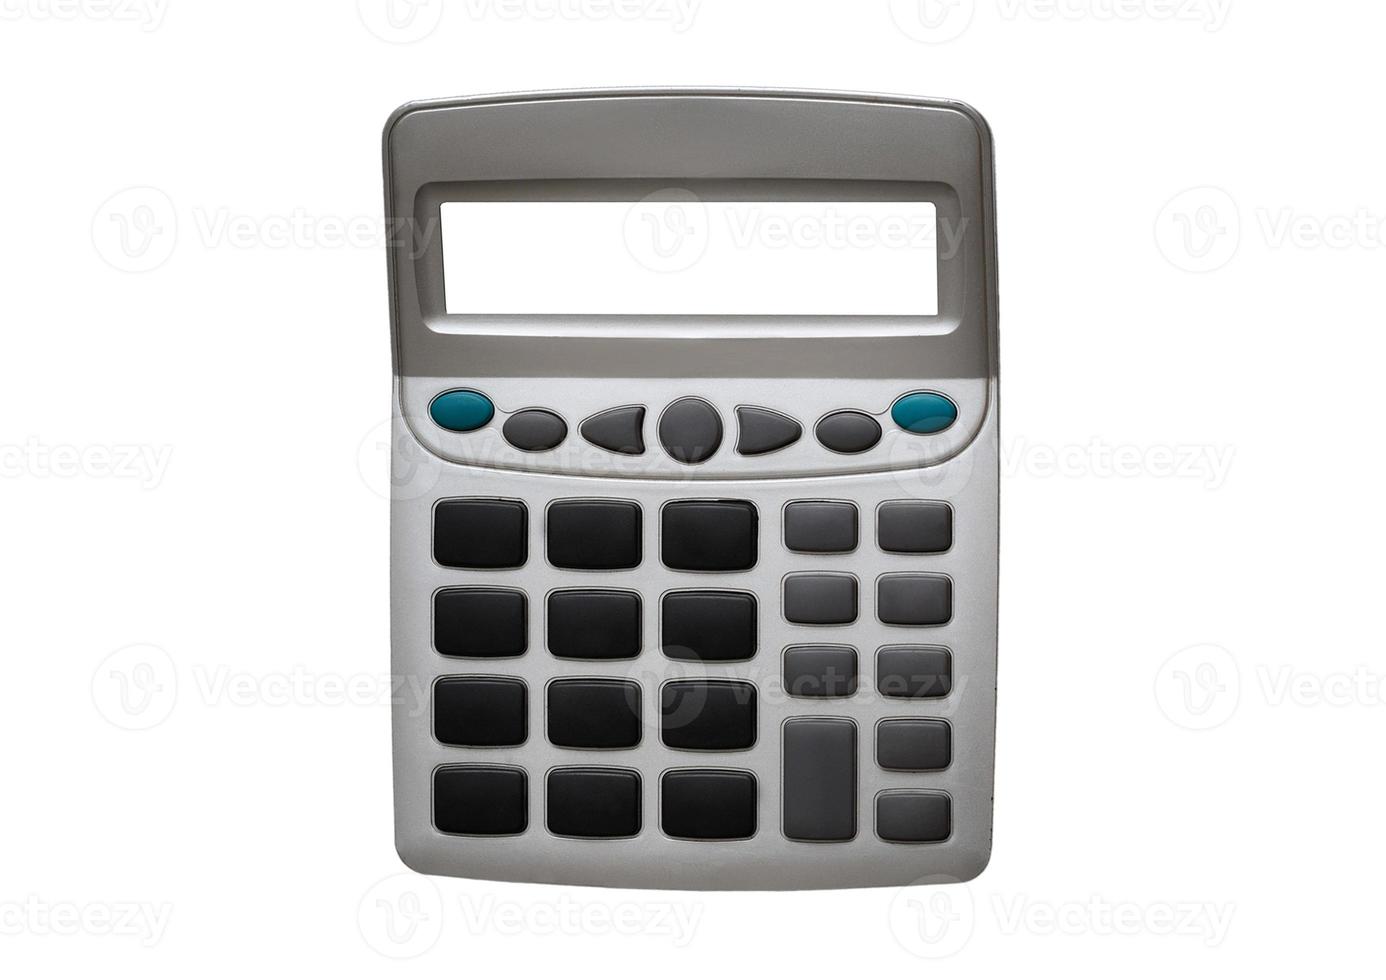 1973 Gray calculator isolated on a transparent background photo